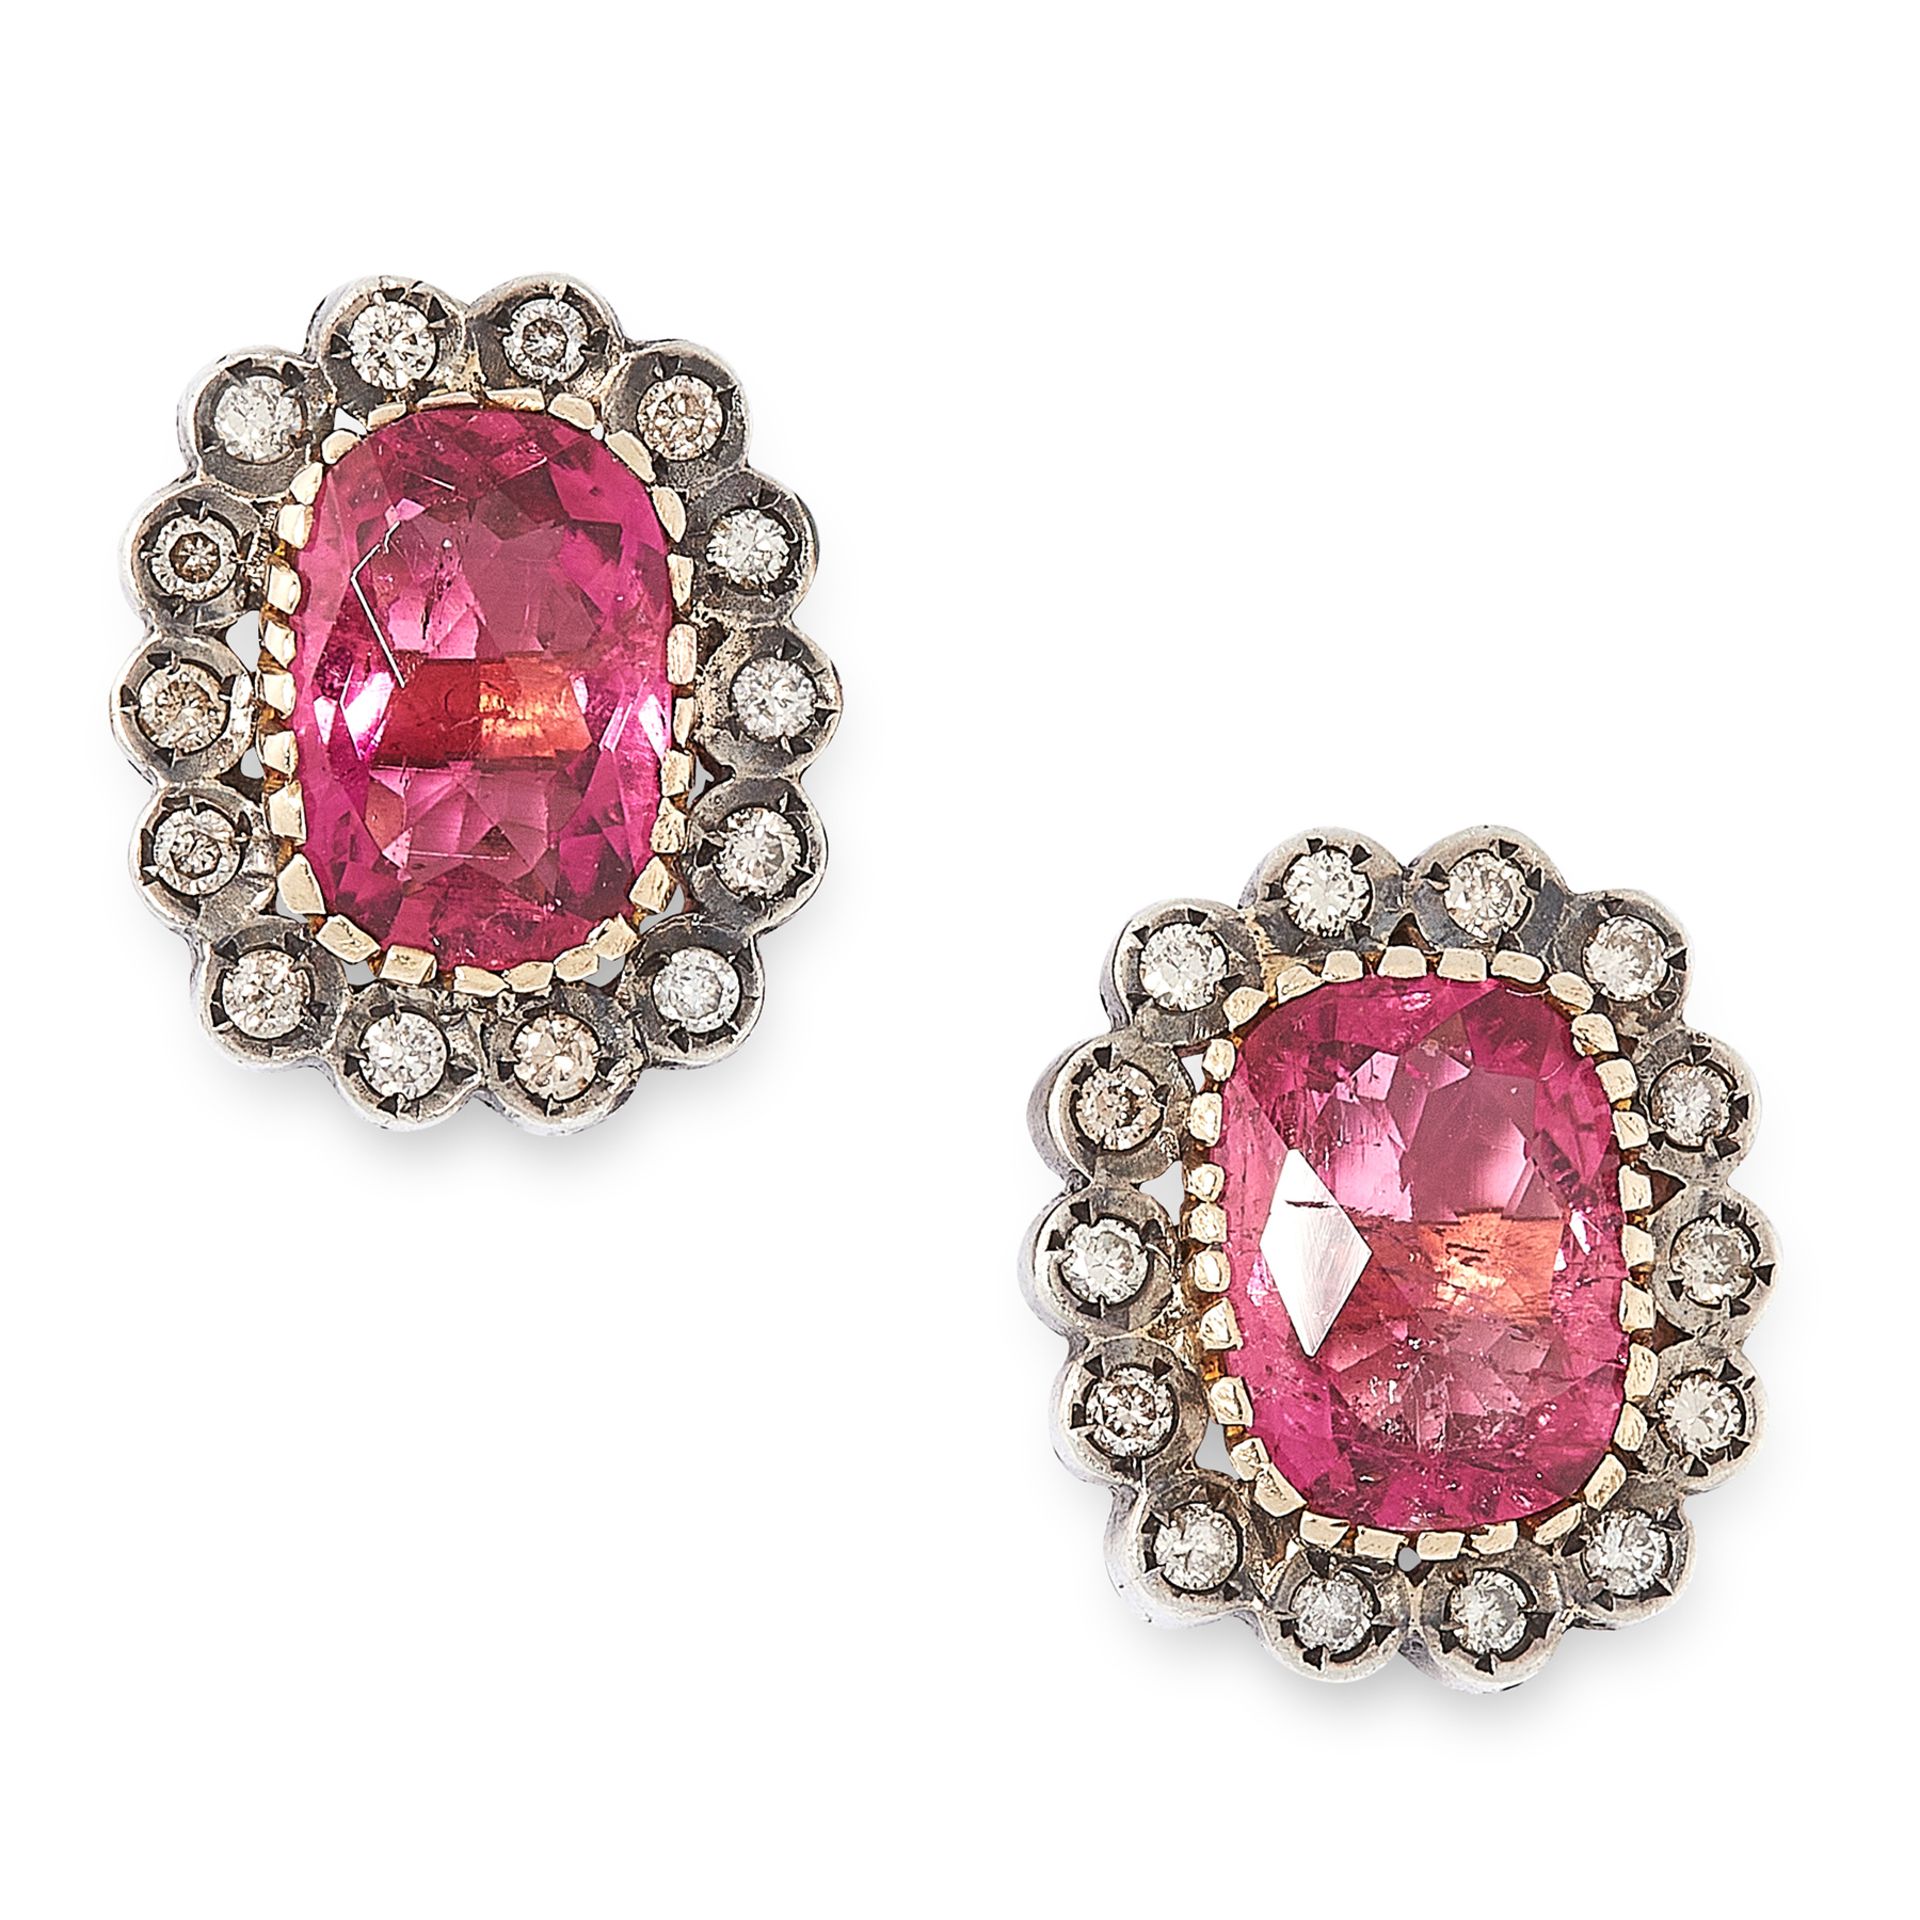 A PAIR OF RUBELLITE TOURMALINE AND DIAMOND STUD EARRINGS in yellow gold and silver, each set with